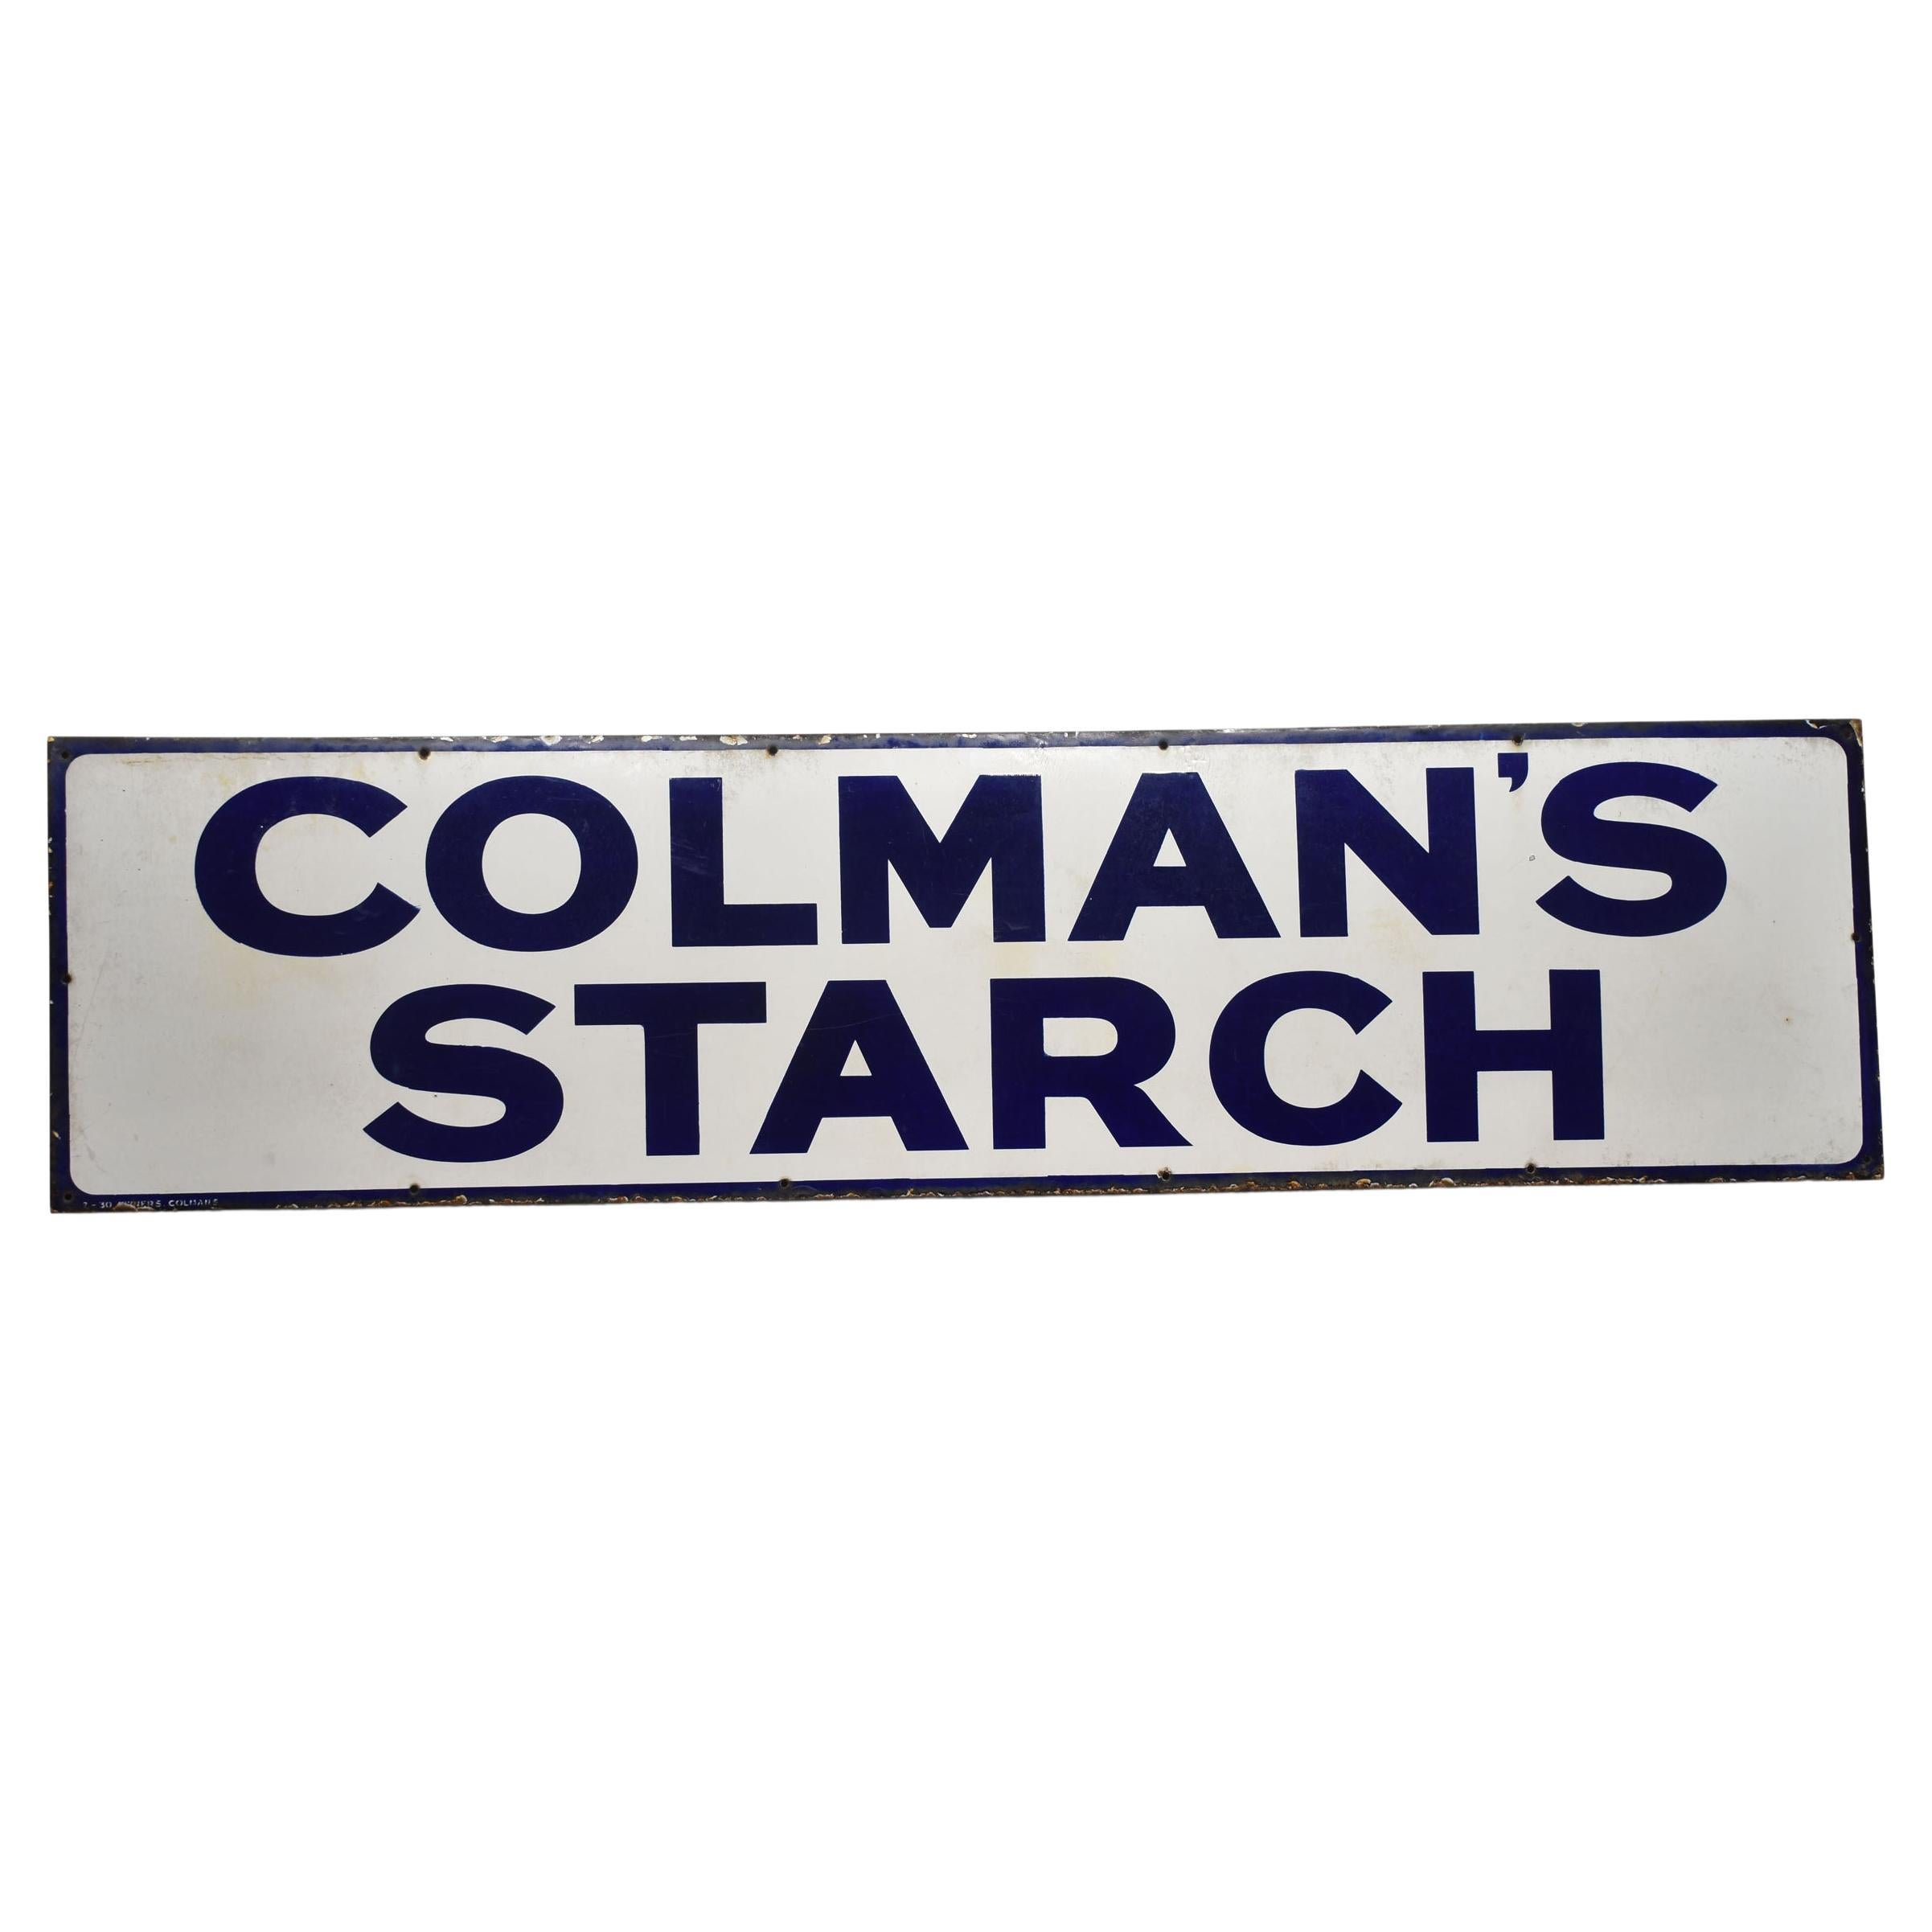 Enamel Sign for Colman’s Starch For Sale